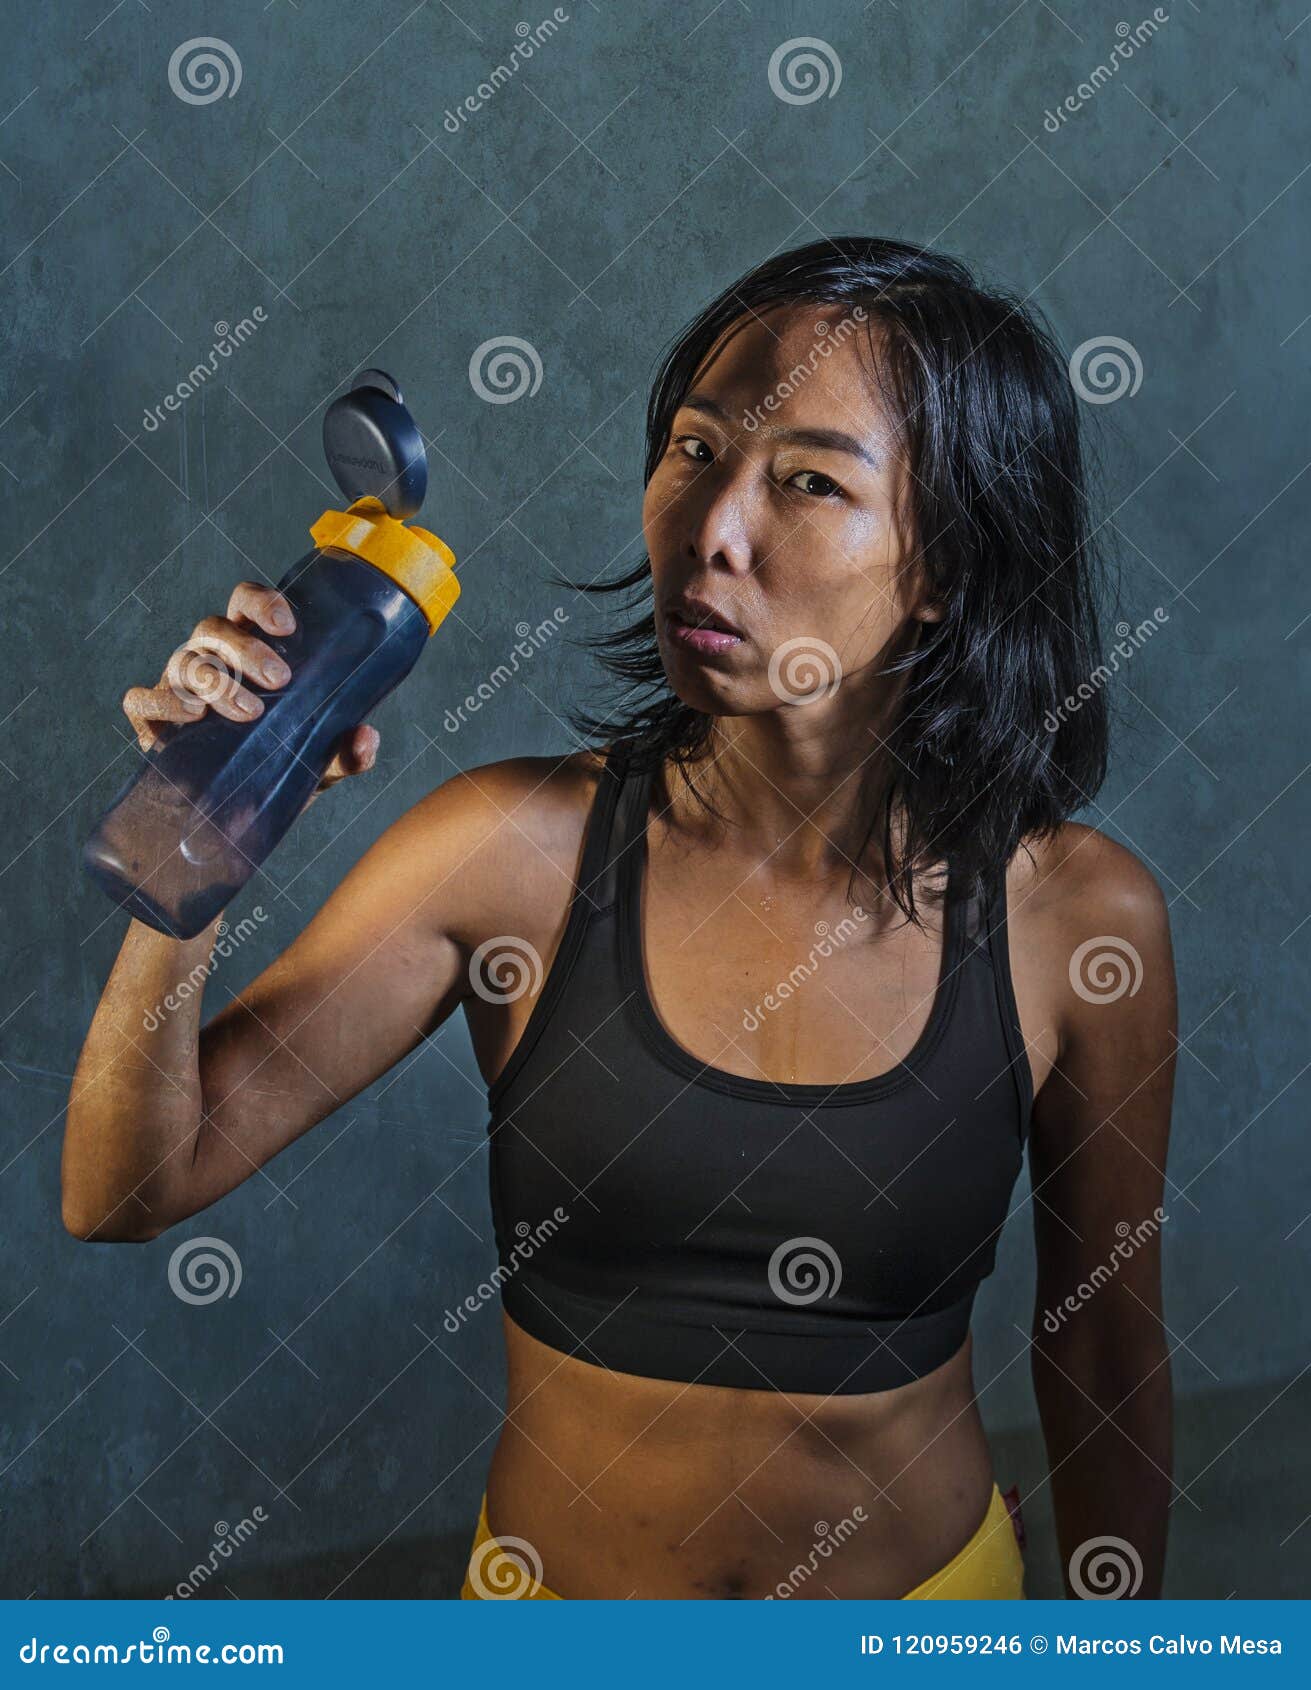 https://thumbs.dreamstime.com/z/portrait-young-athletic-fit-asian-korean-woman-fitness-top-holding-drinking-water-bottle-posing-cool-bad-girl-defiant-120959246.jpg